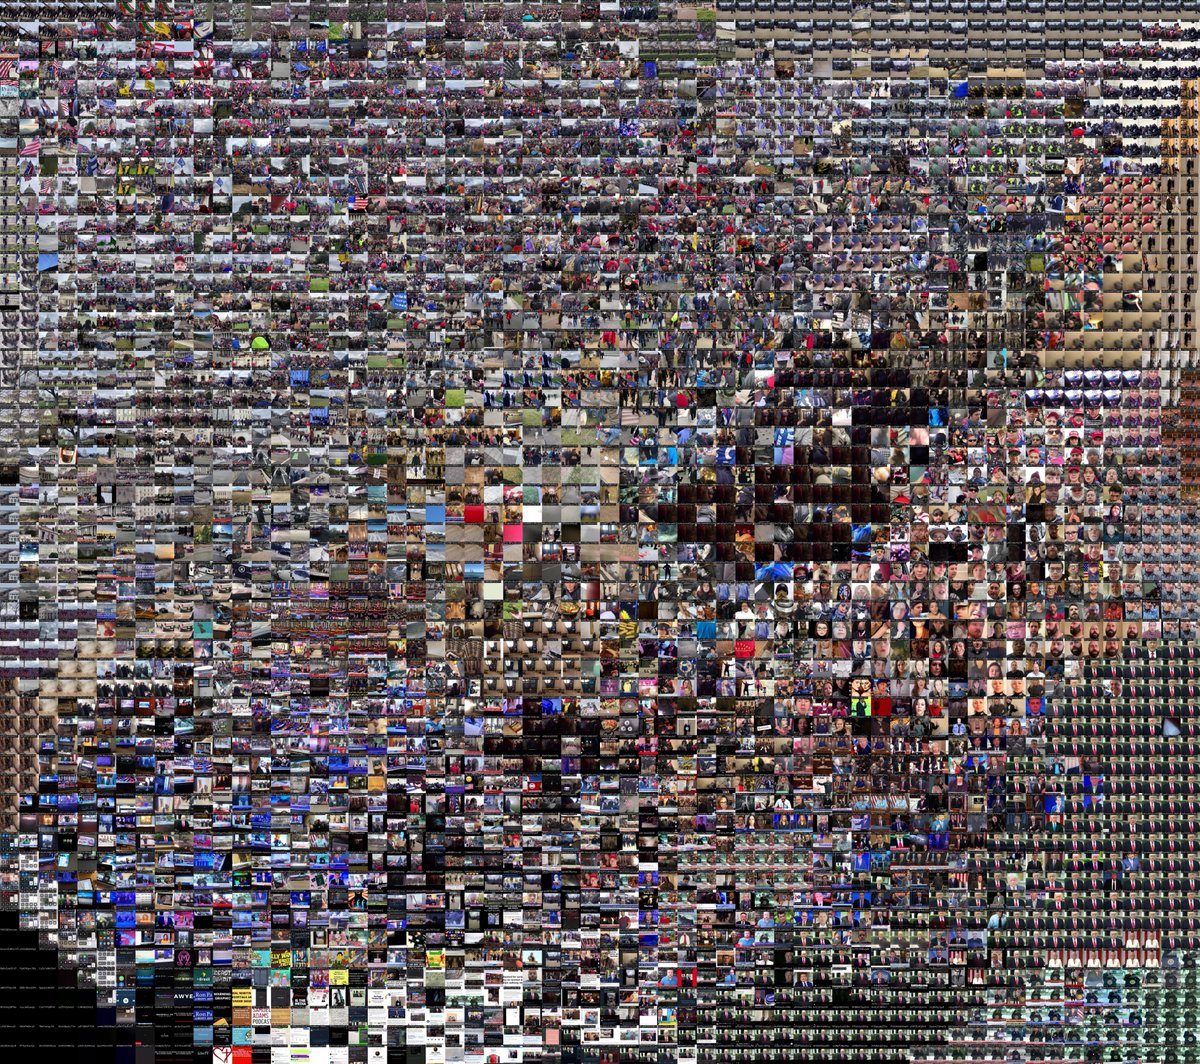 giant 9000x8000 pixel image (42MB) containing the first frame of every public video uploaded to parler from noon-8pm EST on the 6th *that was not geocoded*. the might be evidence in here that has slipped through the cracks  http://kylemcdonald.net/parler/2021-1-6-noon-to-8pm-EST.jpg